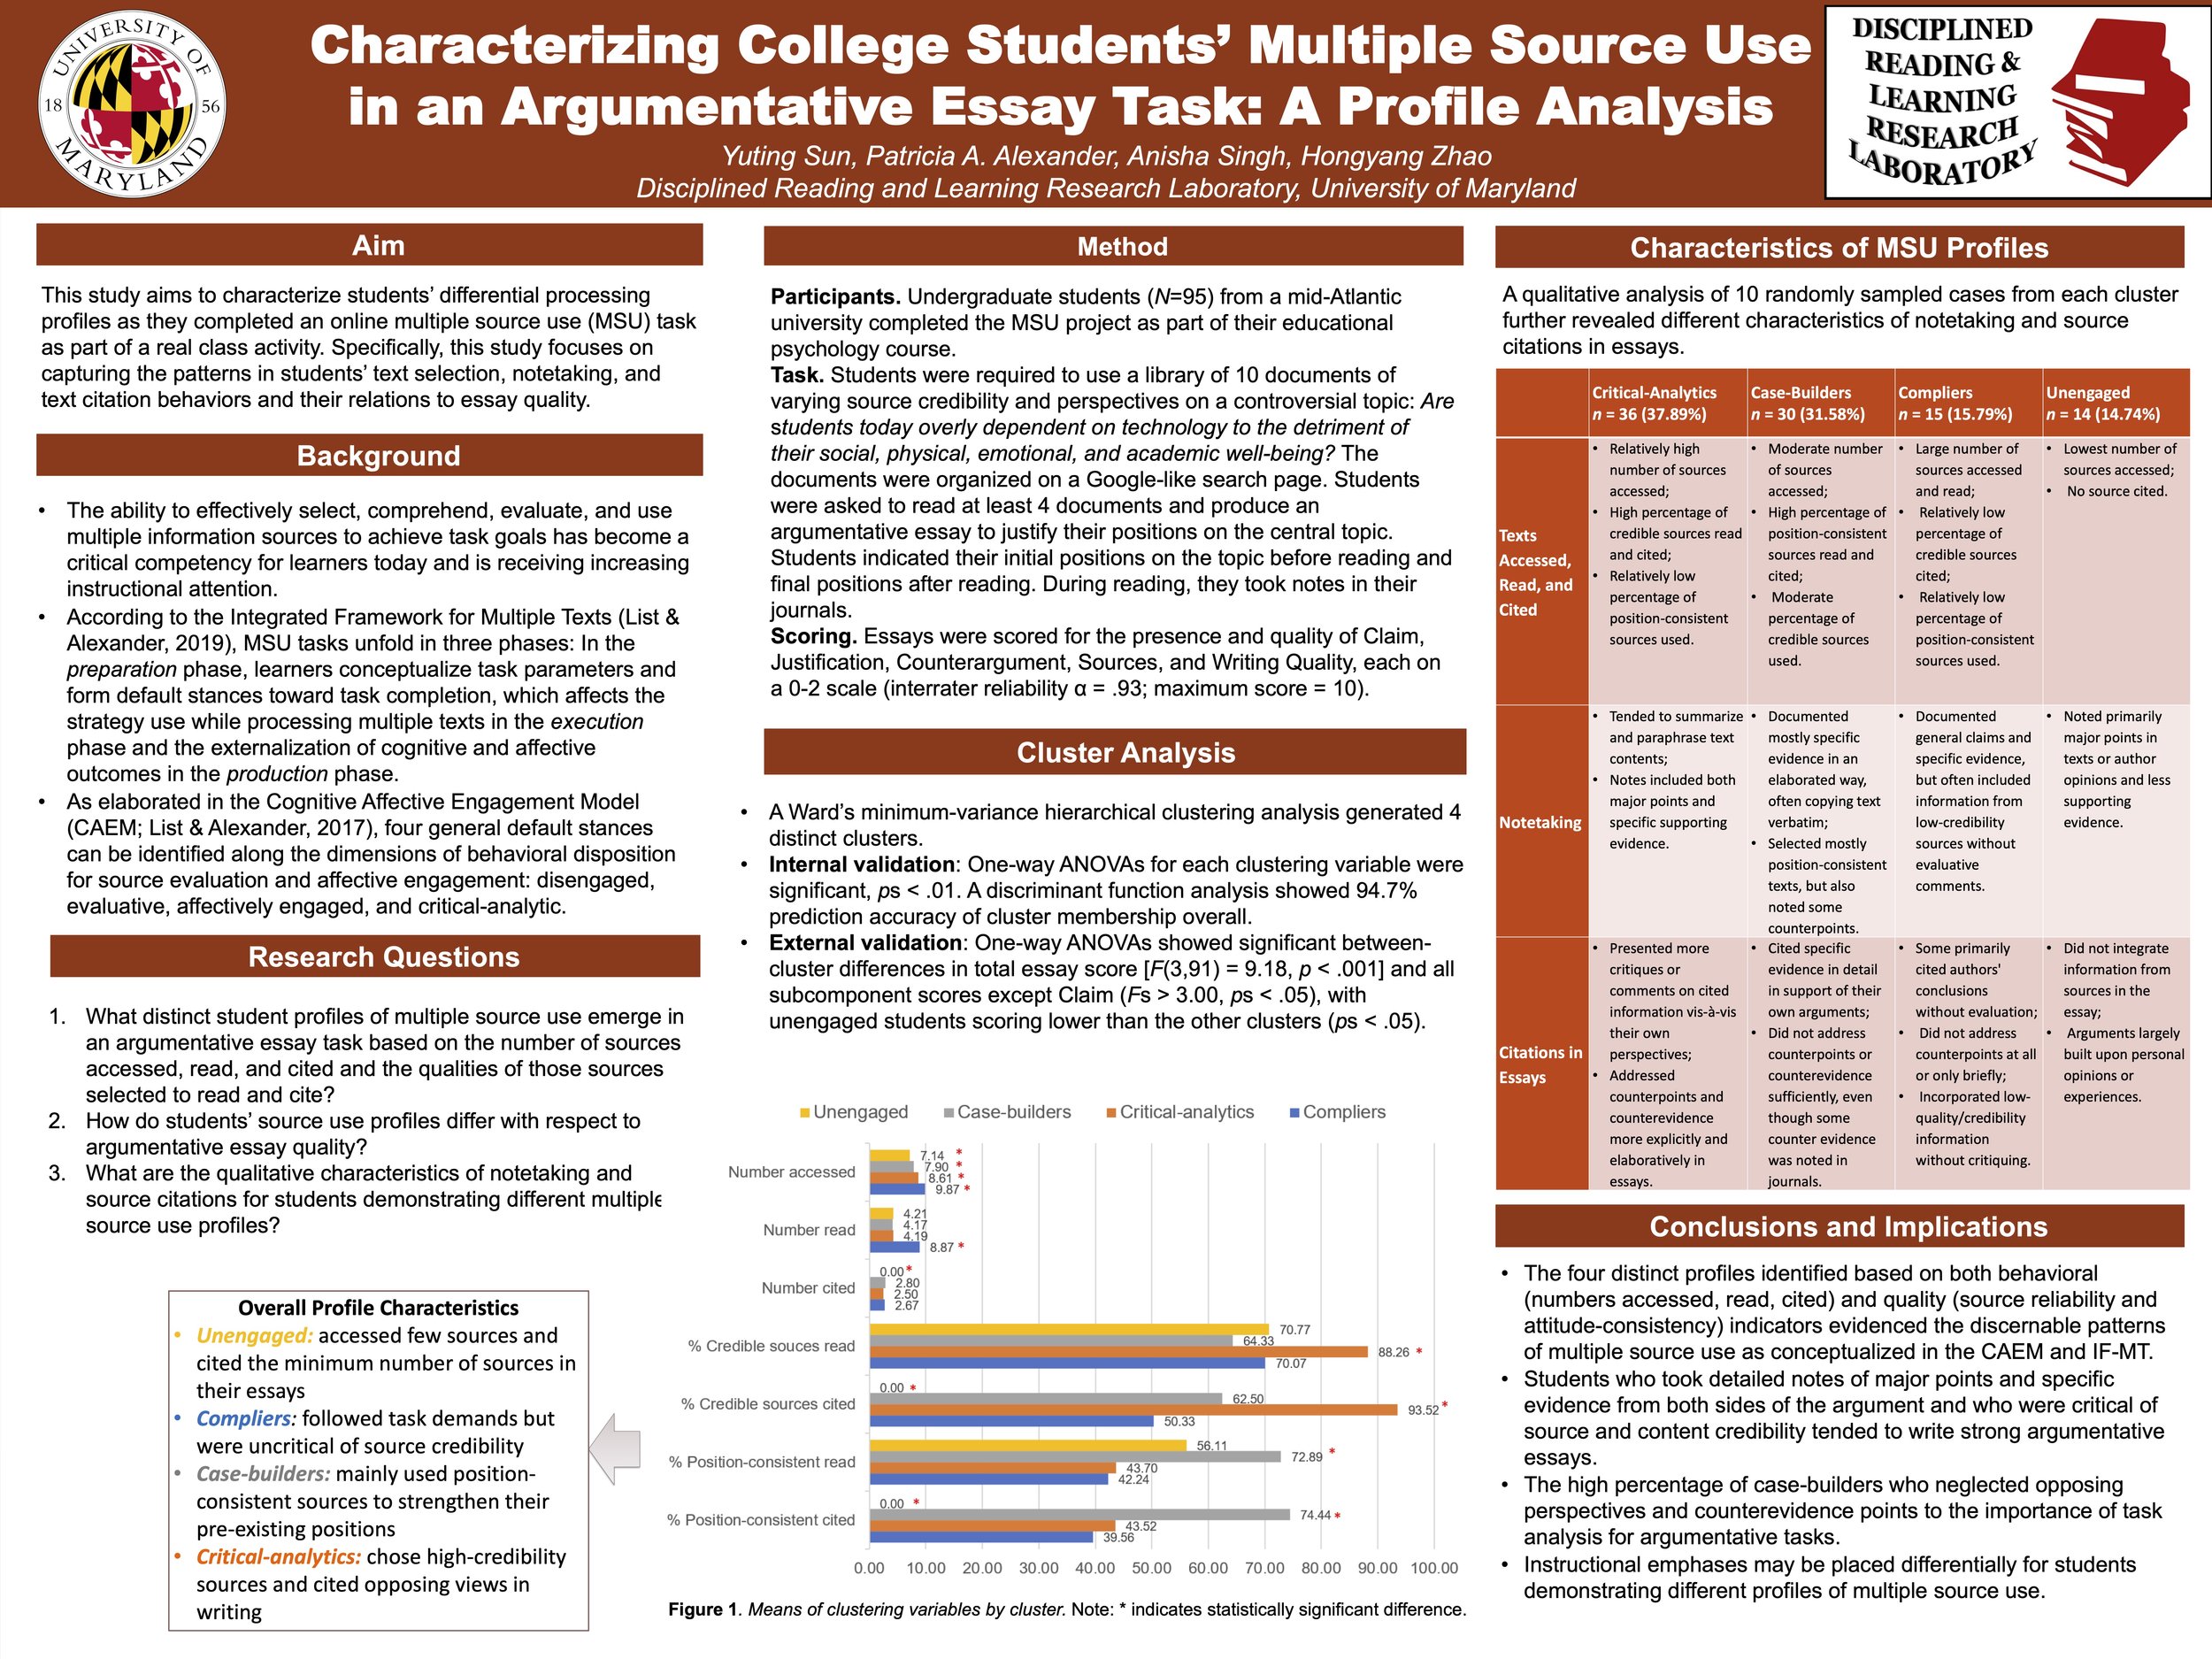 Characterizing College Students’ Multiple Source Use in an Argumentative Essay Task: A Profile Analysis